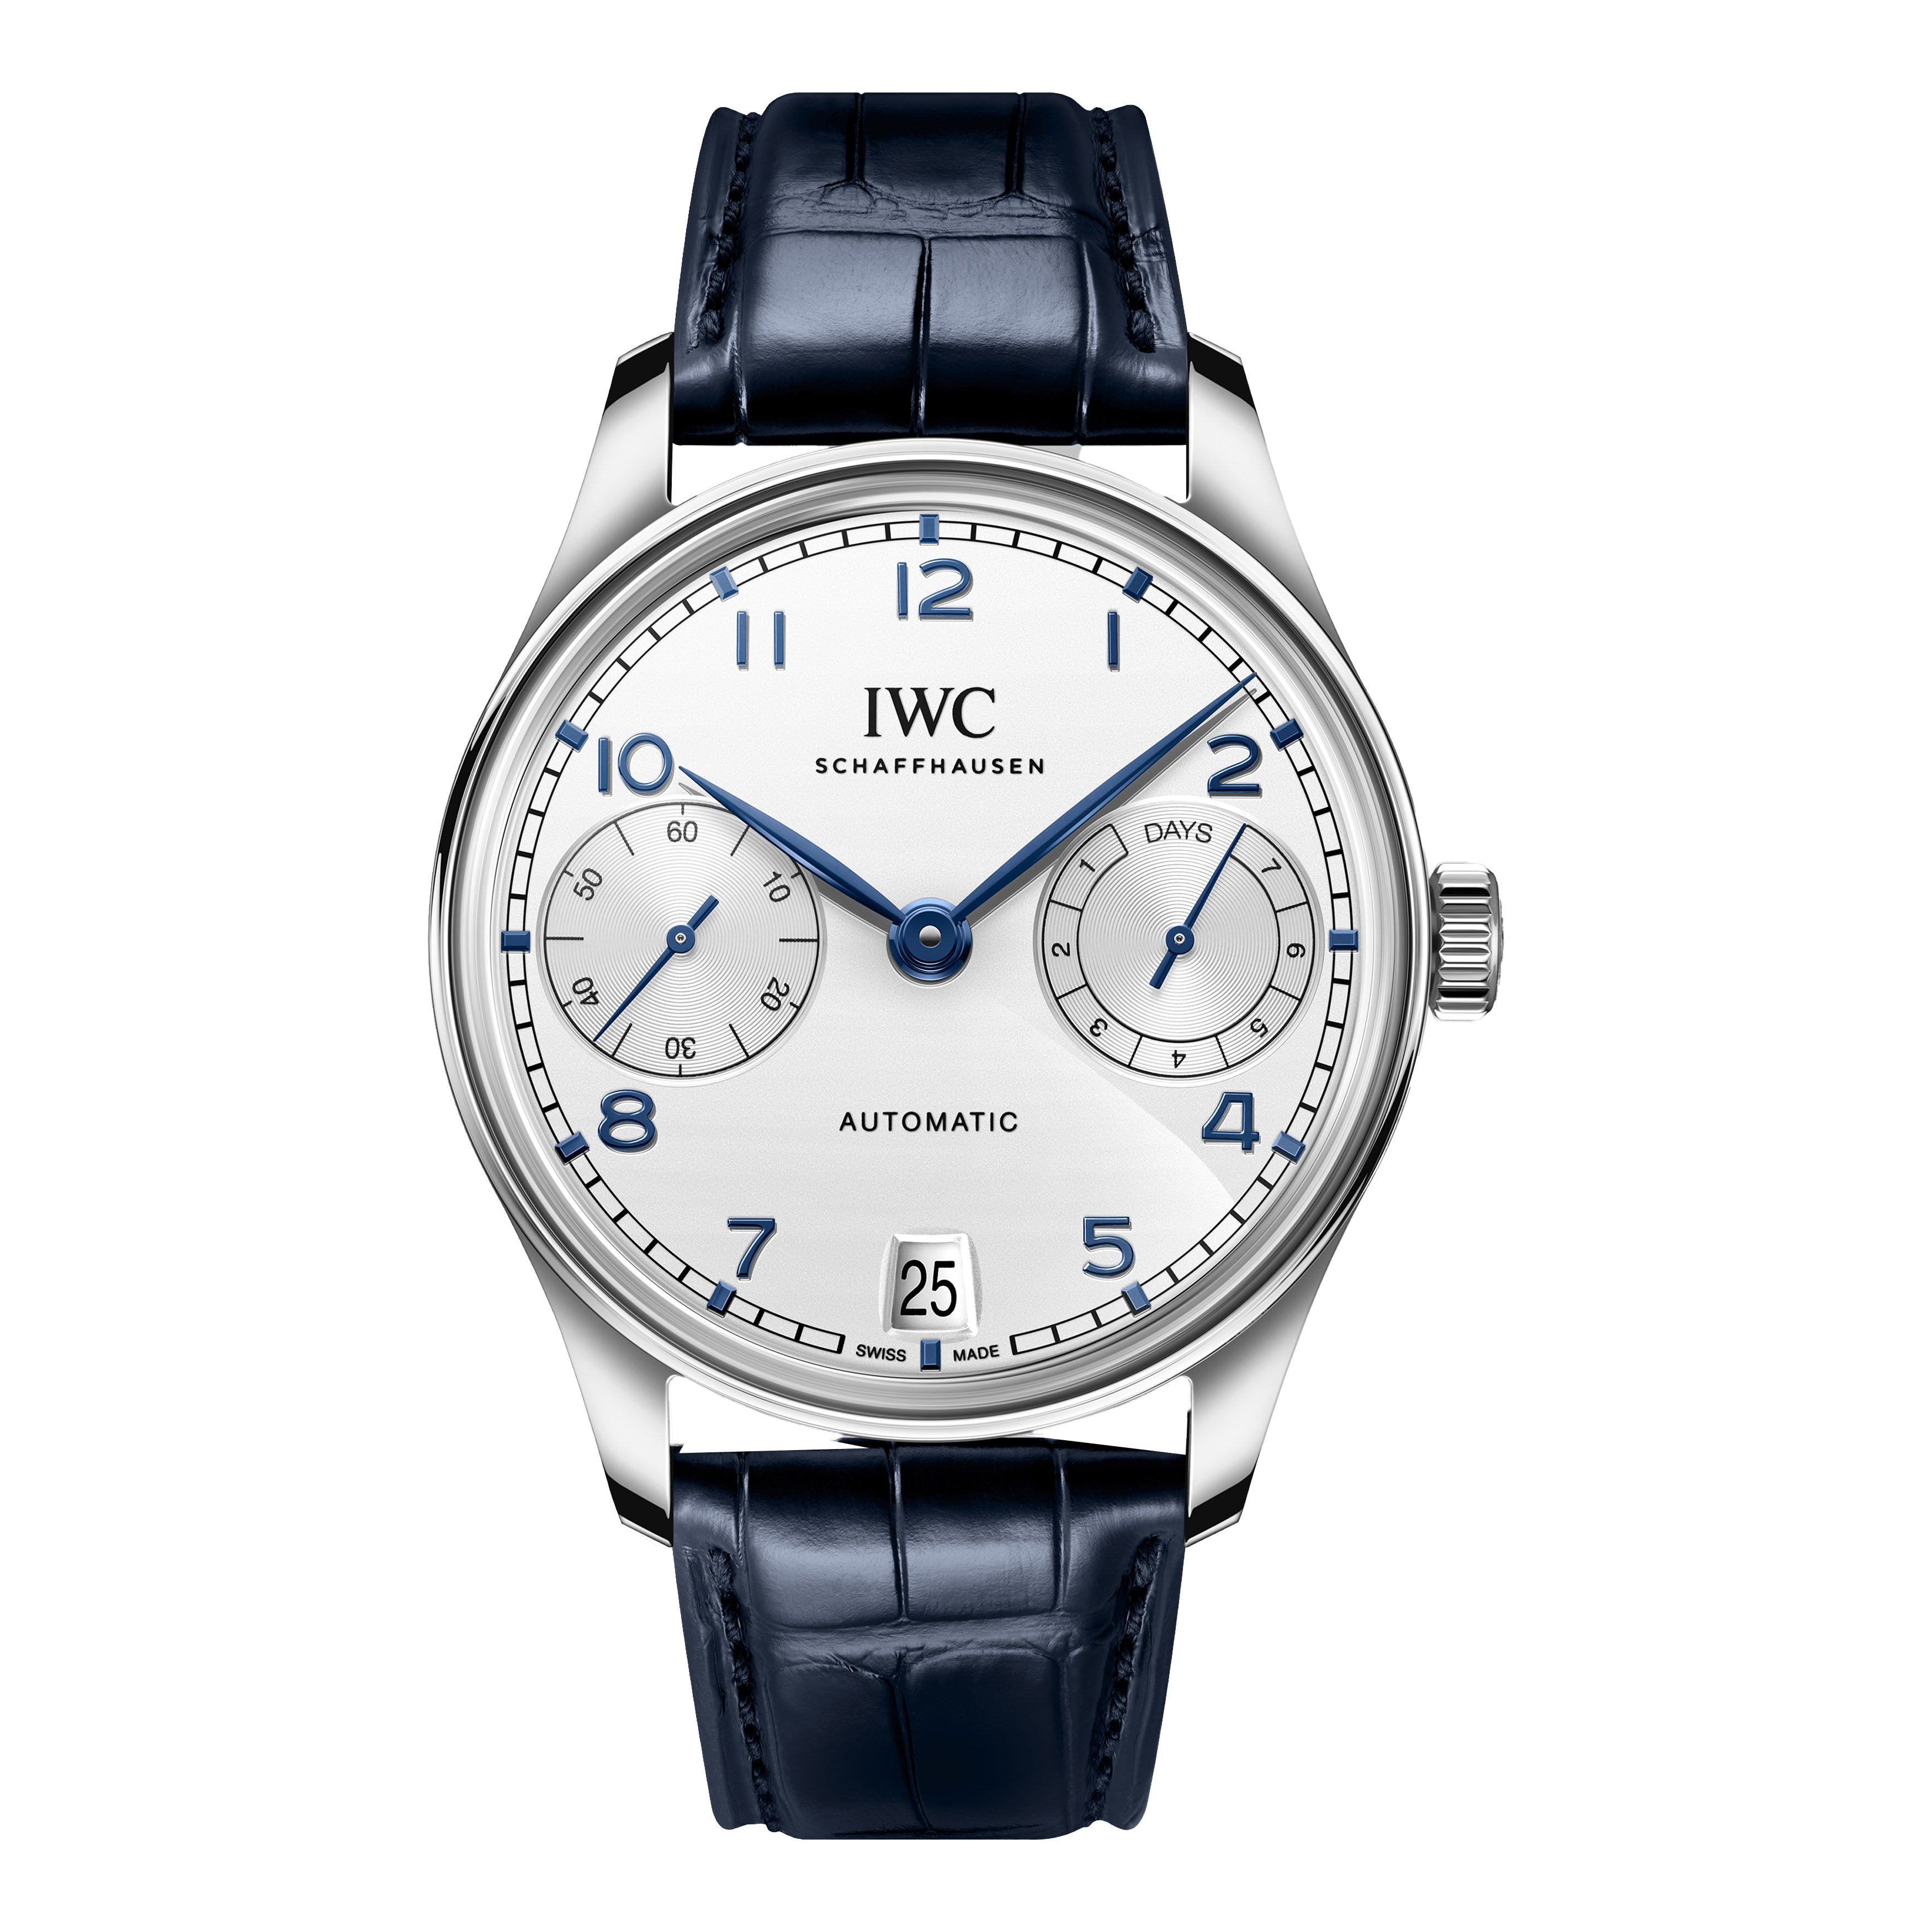 IWC Portugieser Automatic Watch, 42mm Silver Dial, IW501702